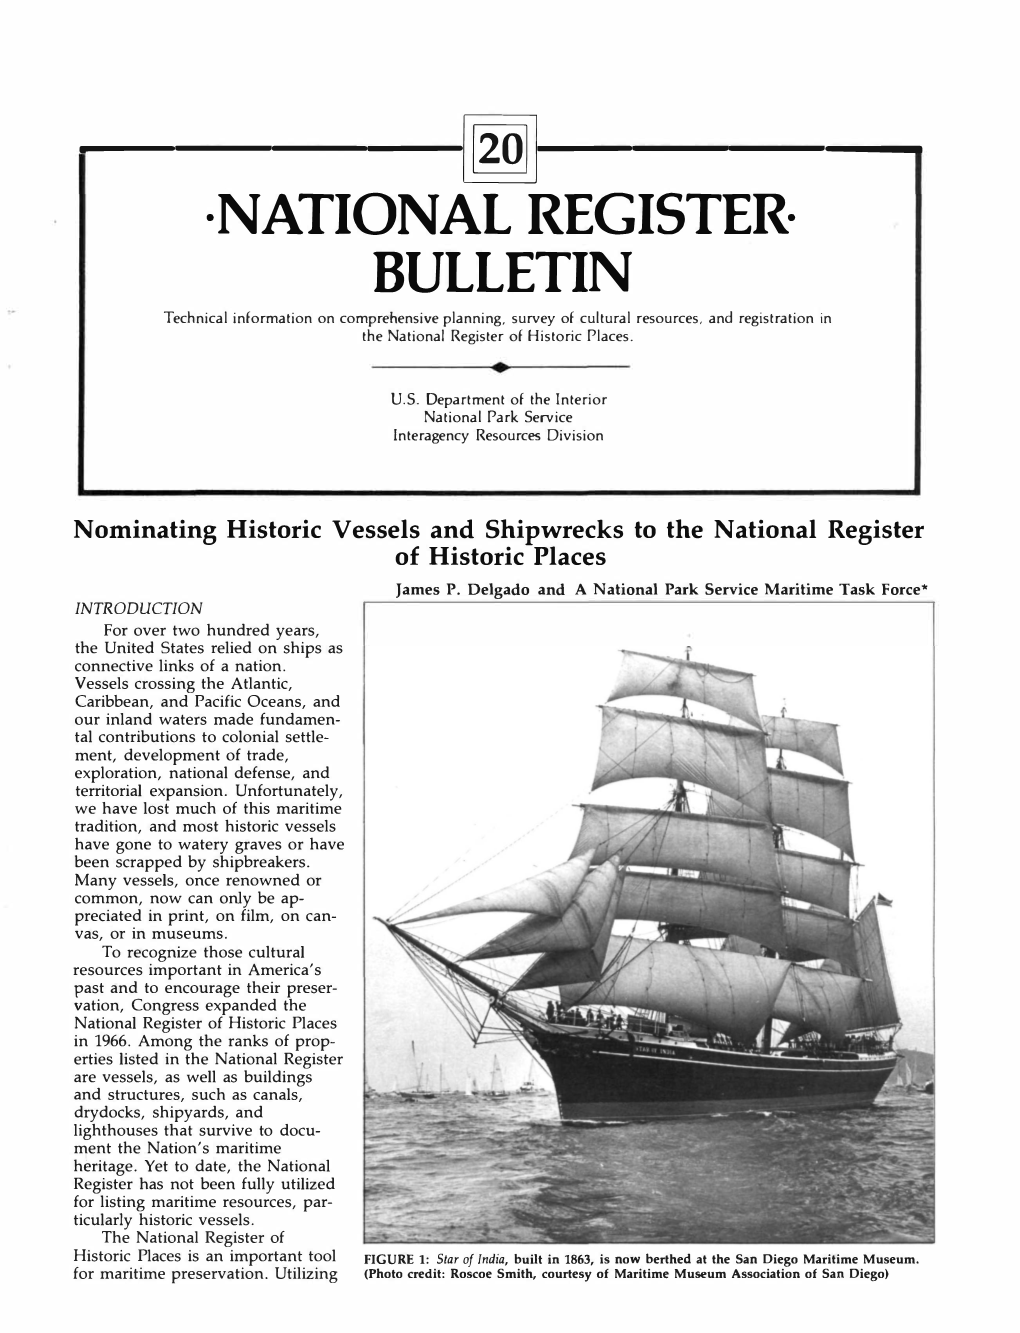 Nominating Historic Vessels and Shipwrecks to the National Register of Historic Places James P